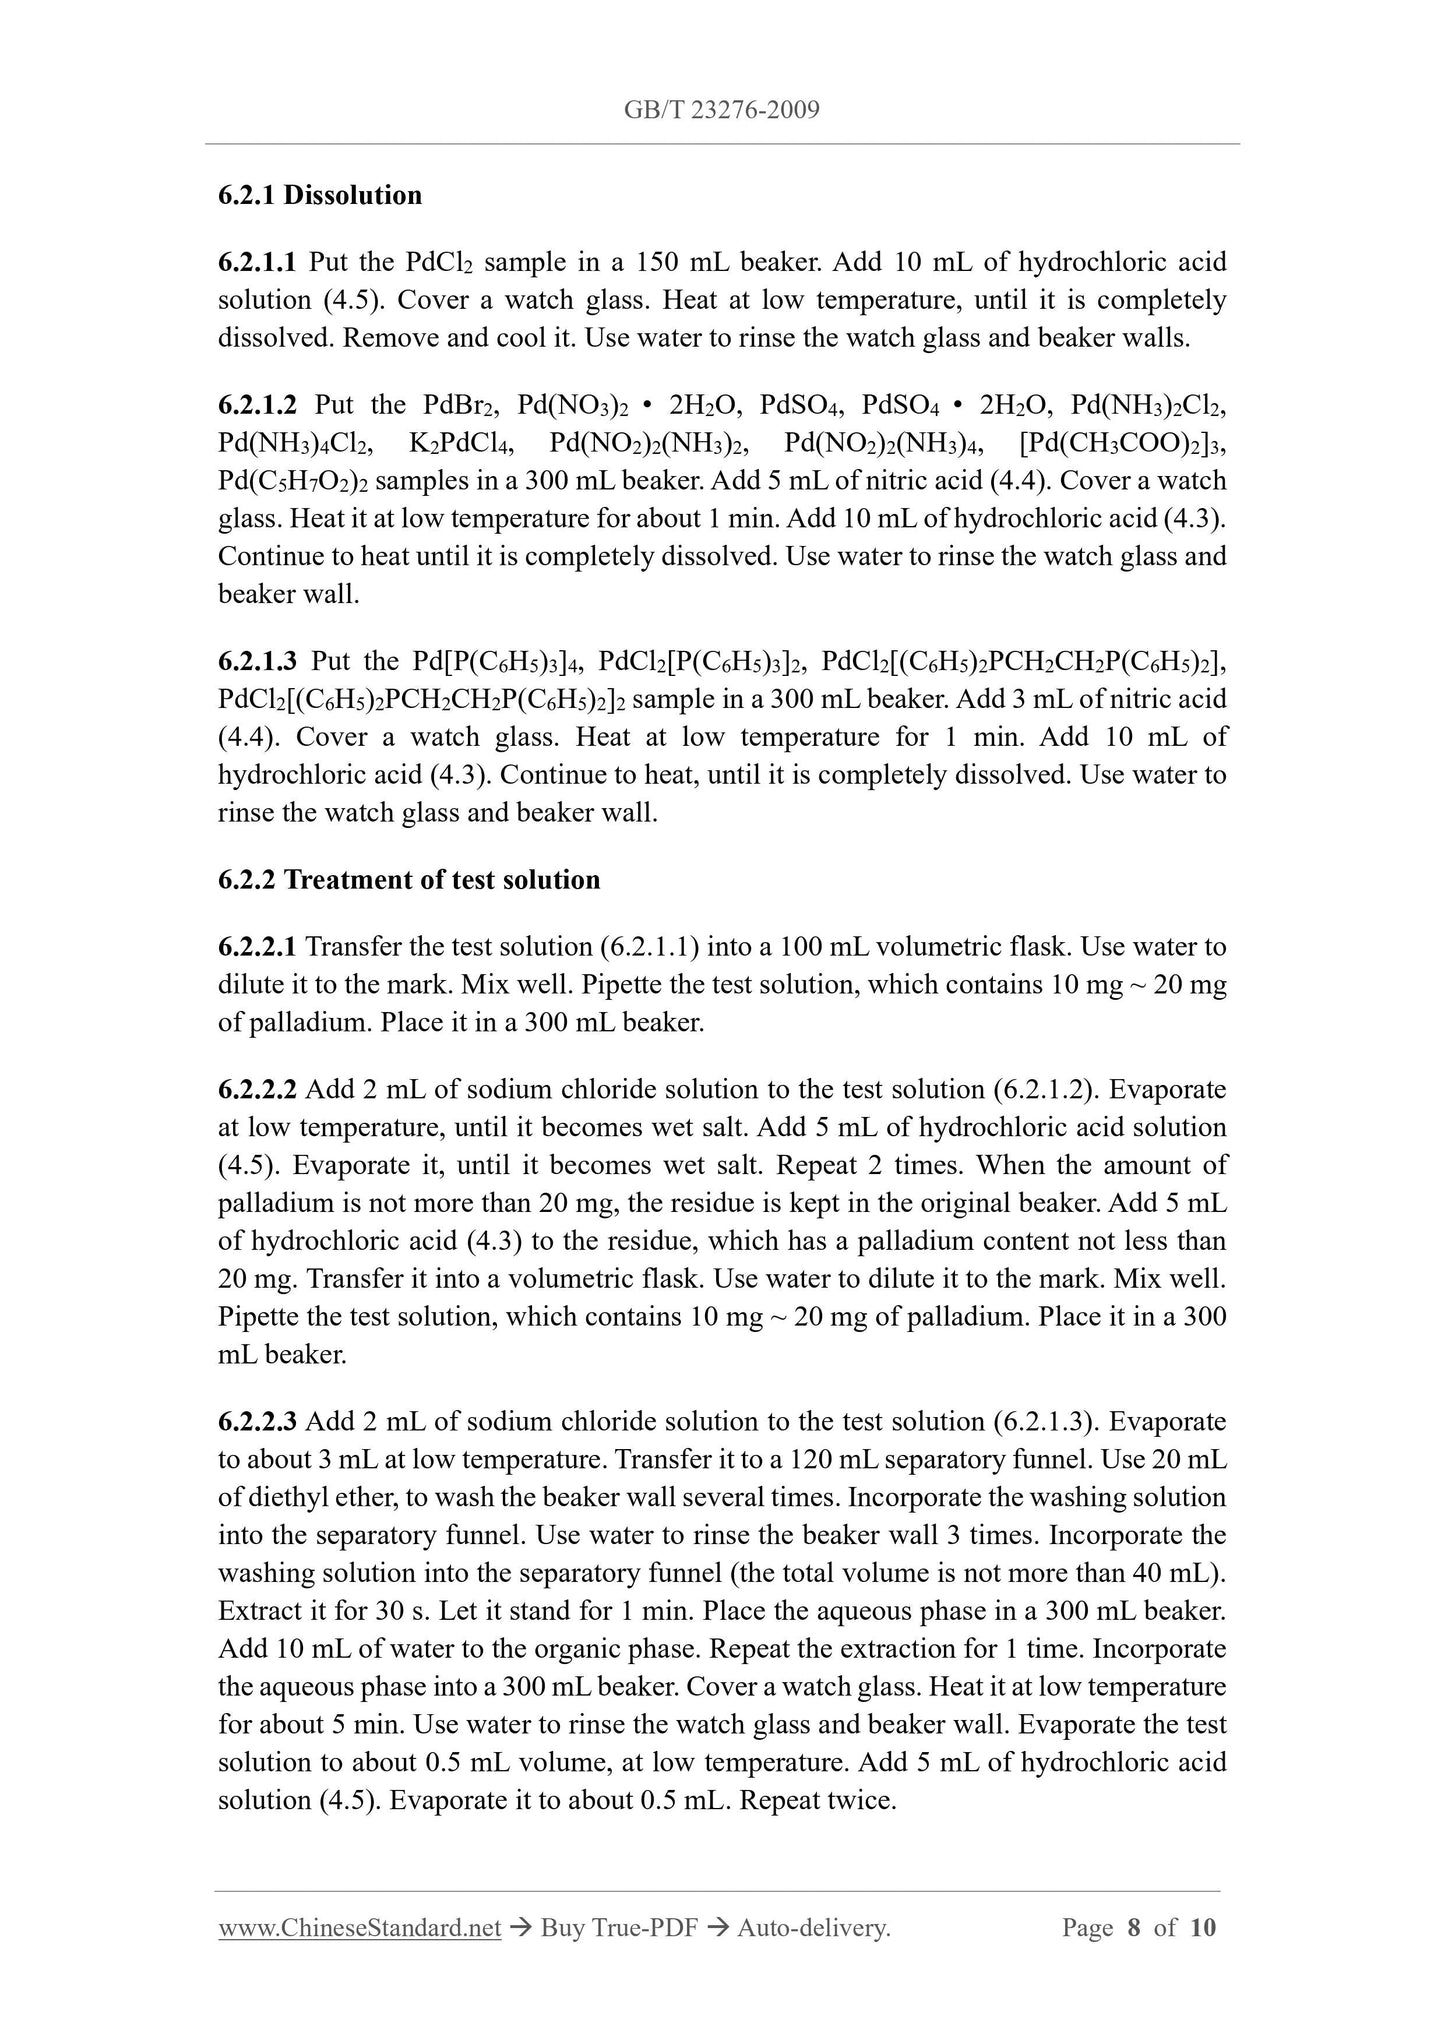 GB/T 23276-2009 Page 5